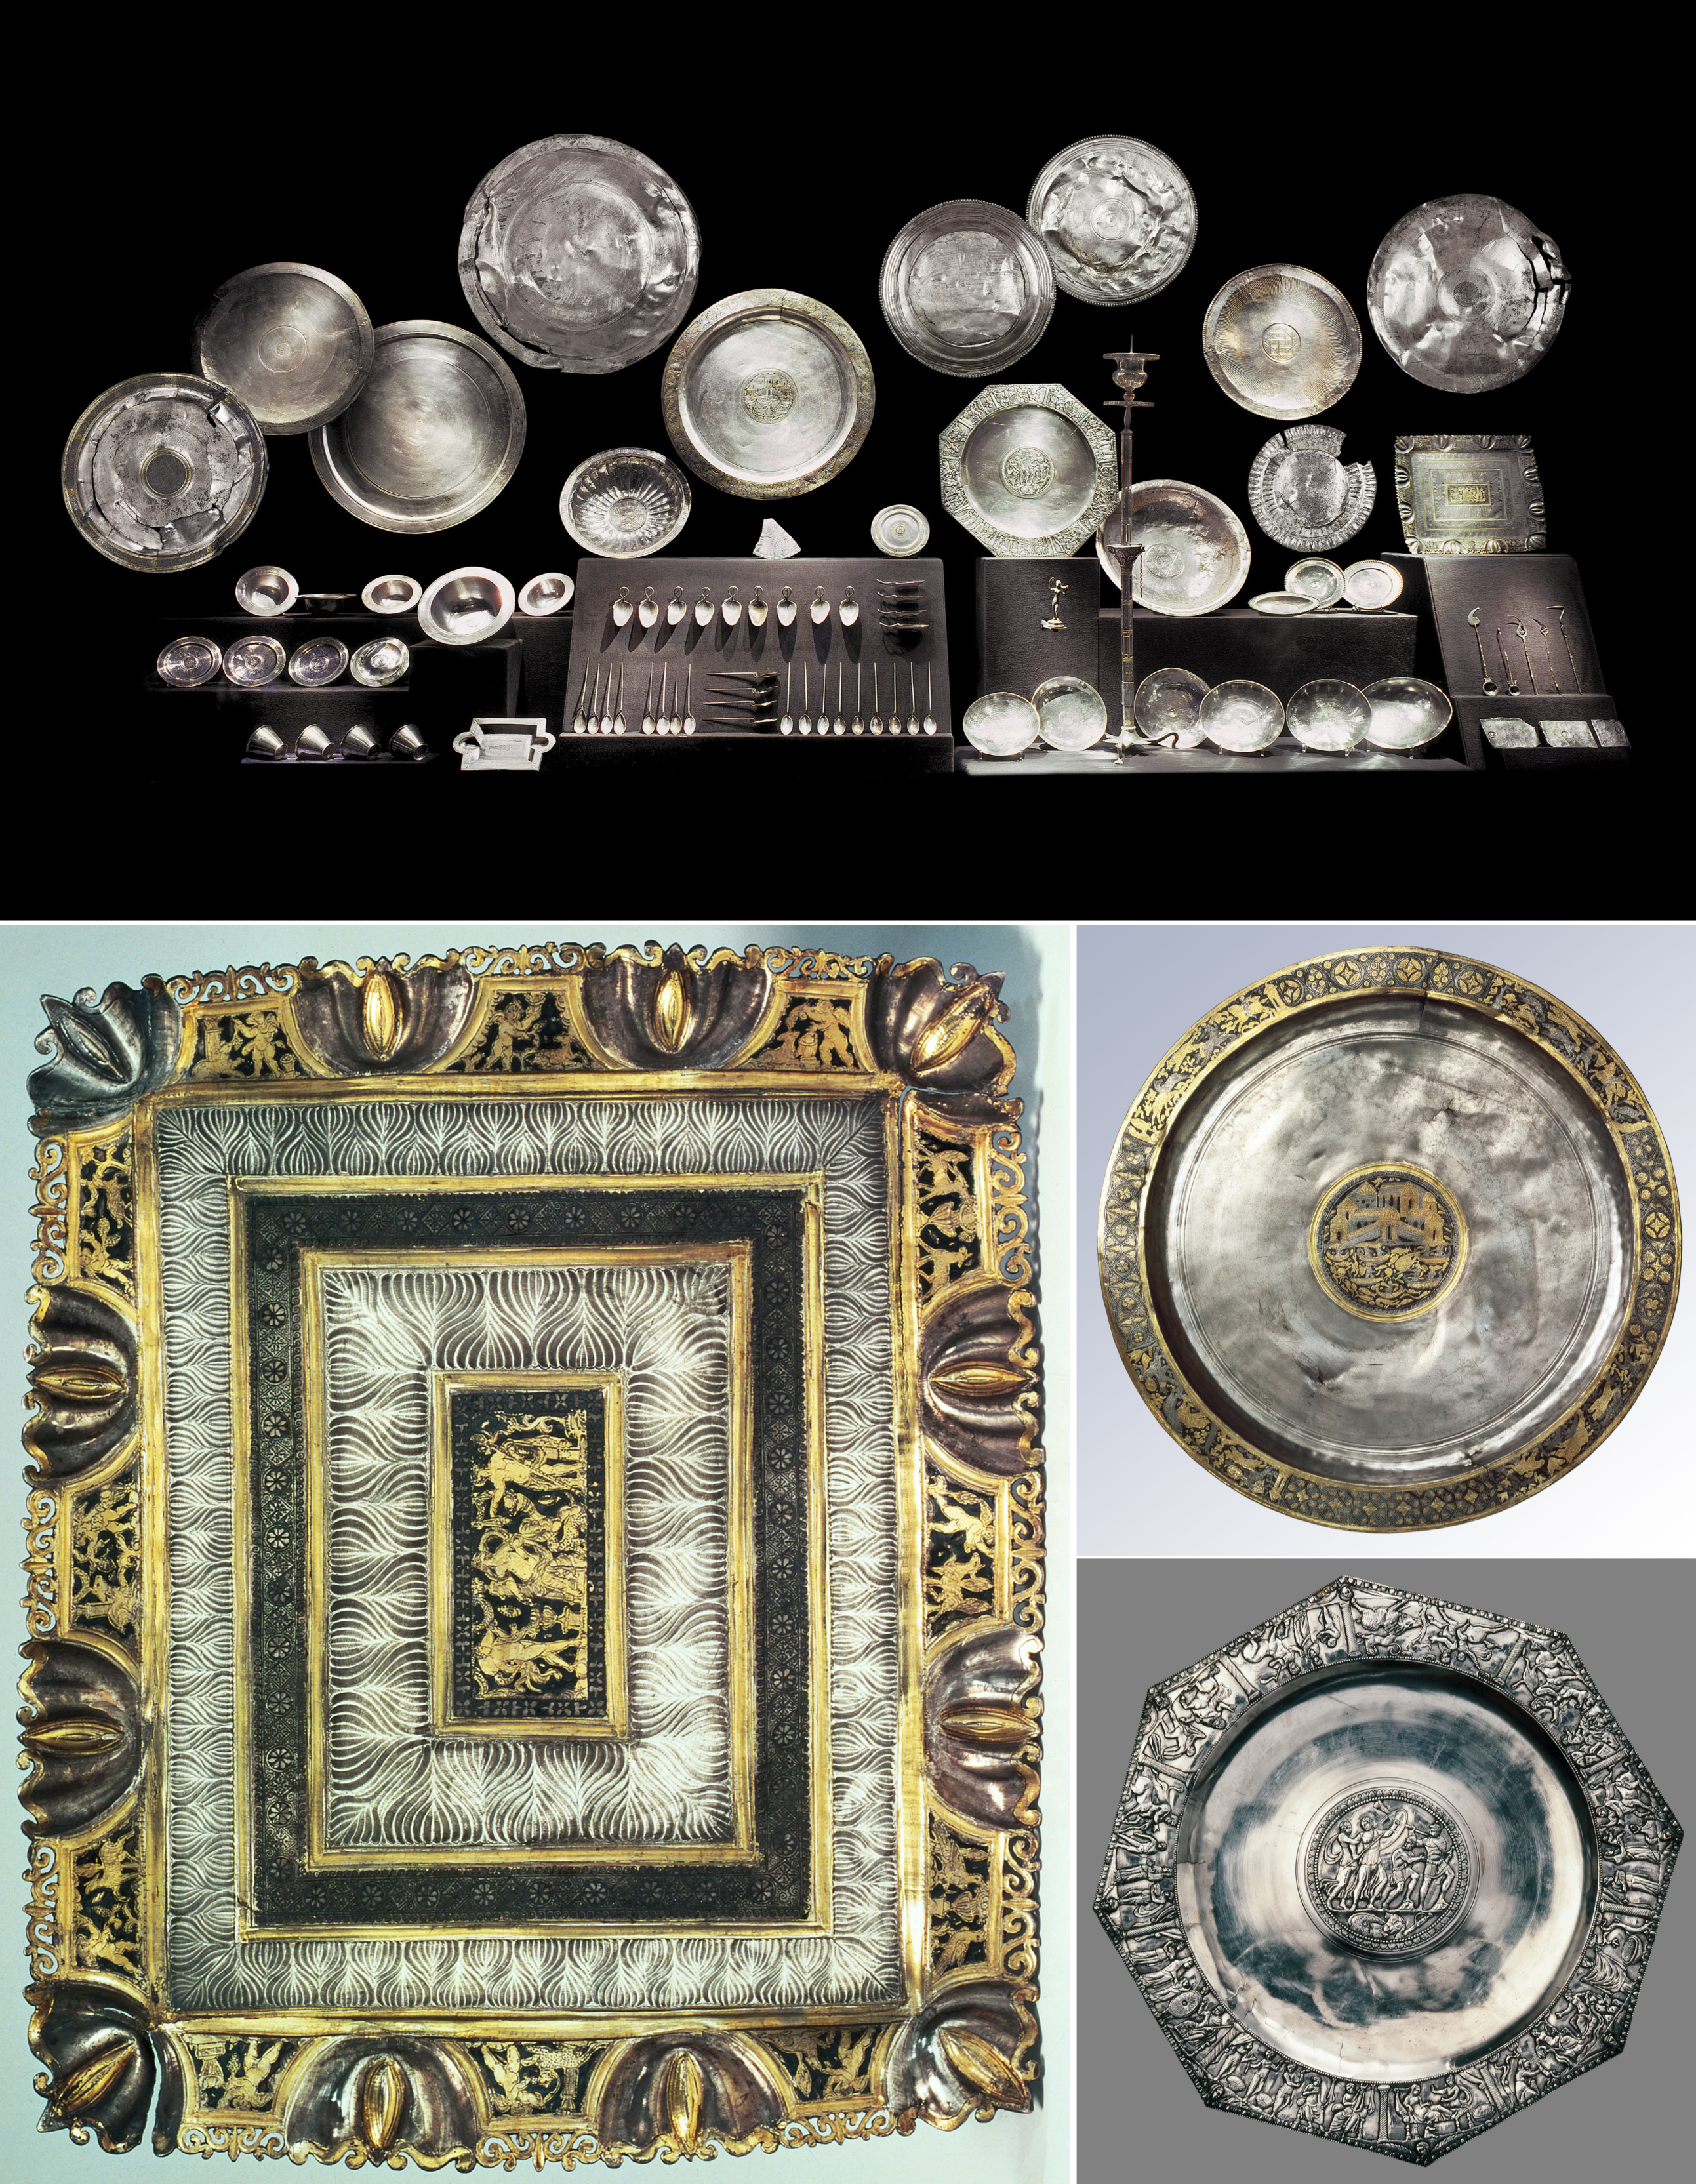 The treasure of Augusta Raurica, 58 kg of pure silver, 270 objects, found in 1961 in a pit within the late Roman fort of Kaiseraugst,Switzerland.  An opulent banqueting set, silver coins and ingots.png